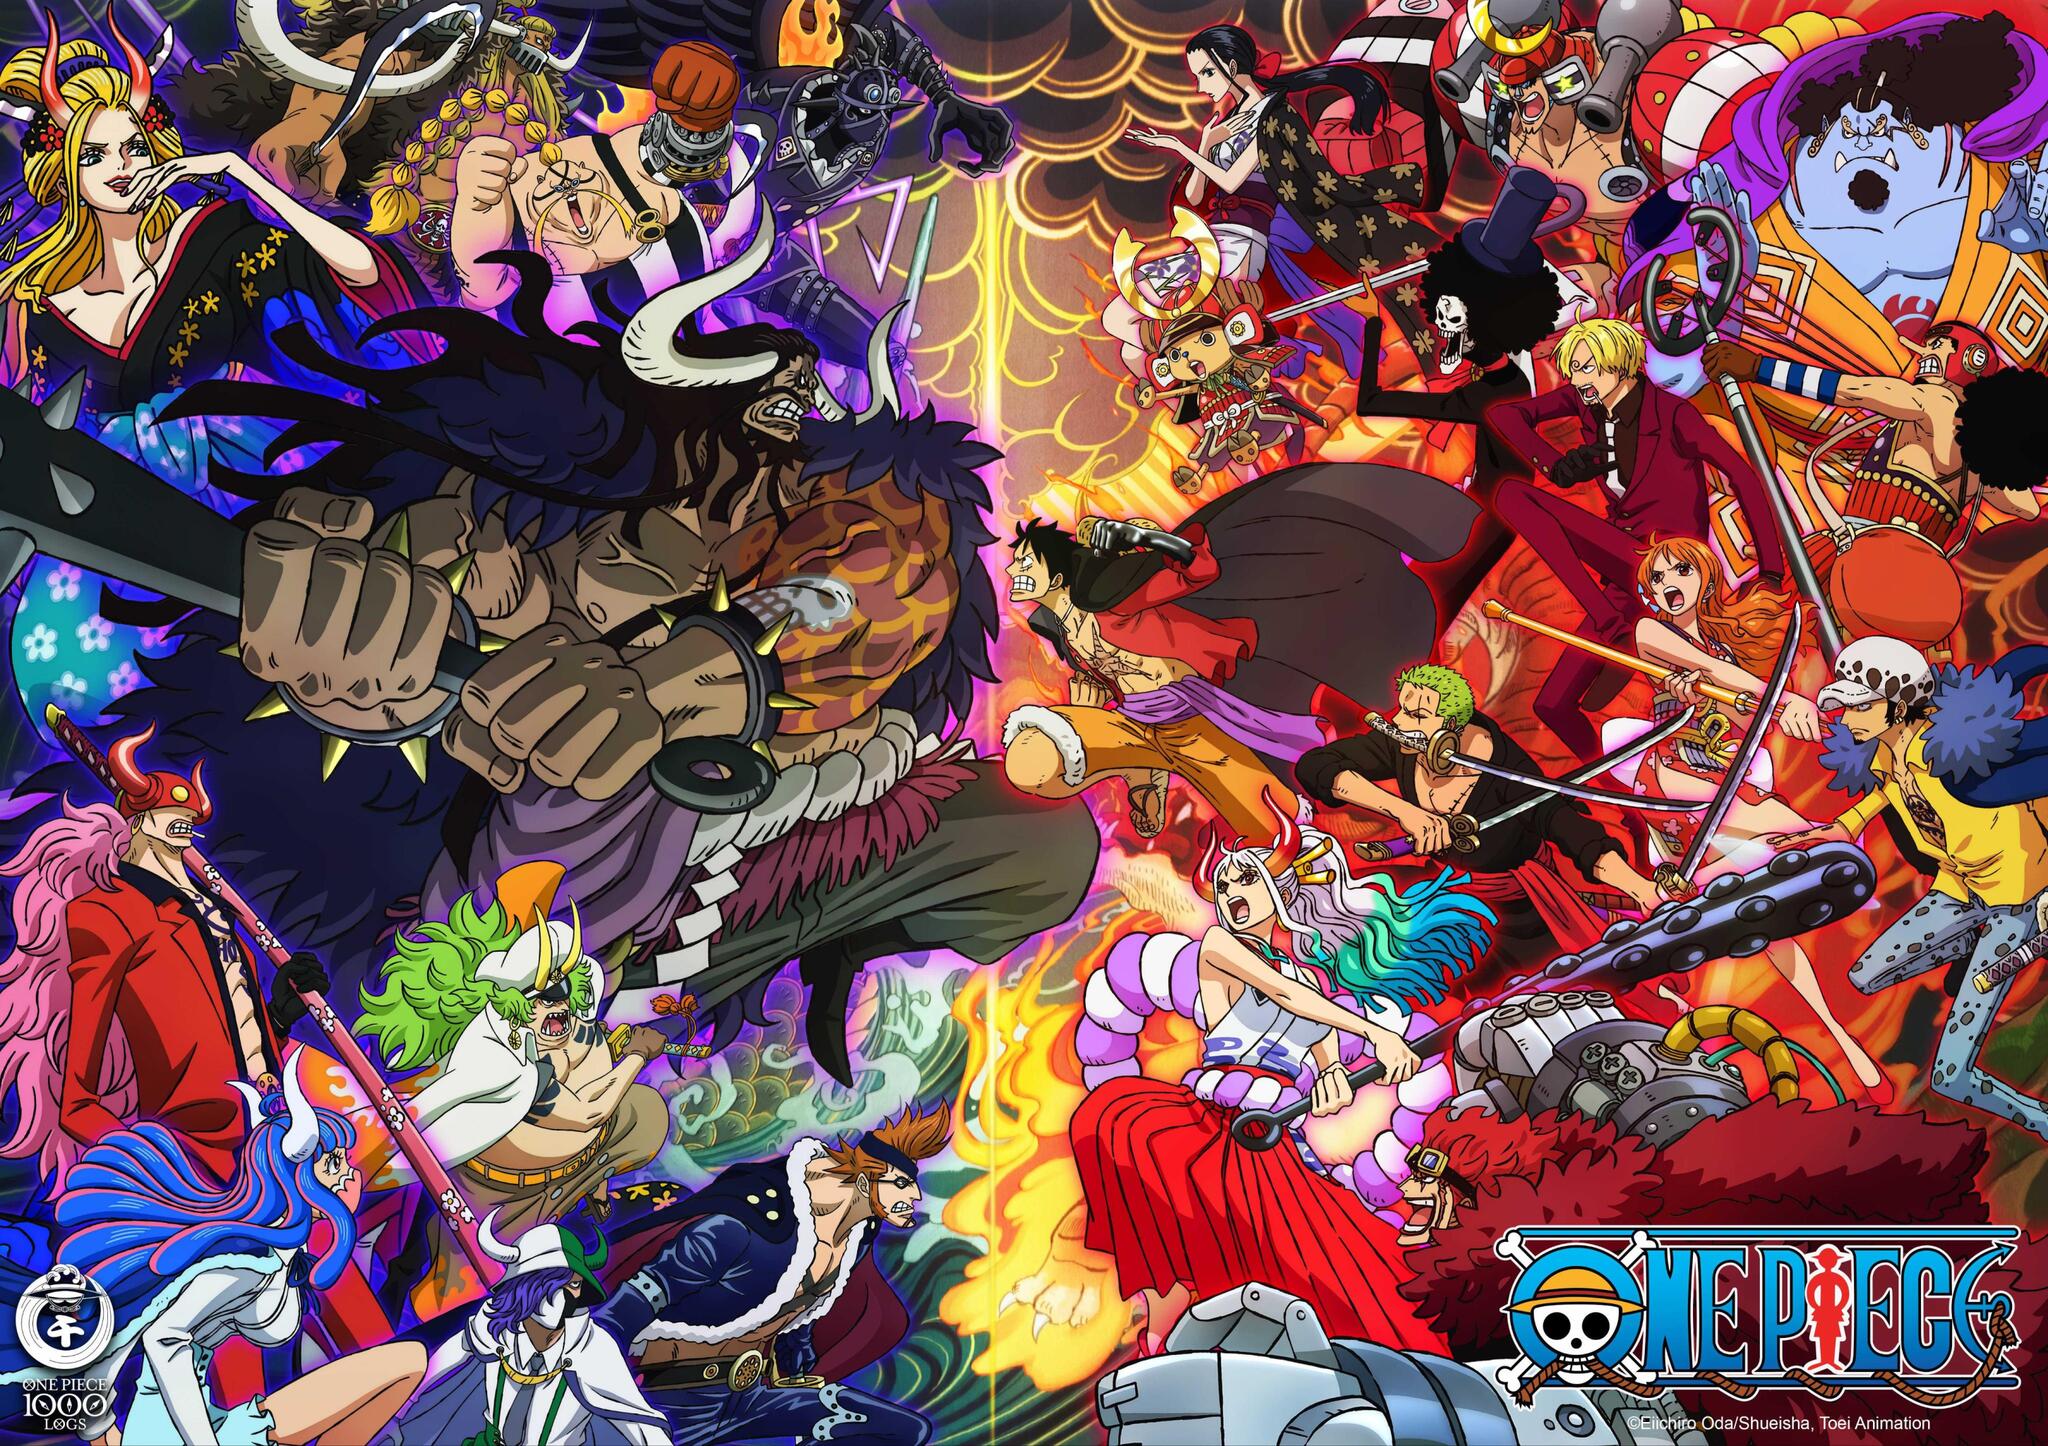 How to watch 'One Piece': Where to stream 1,000th episode, time